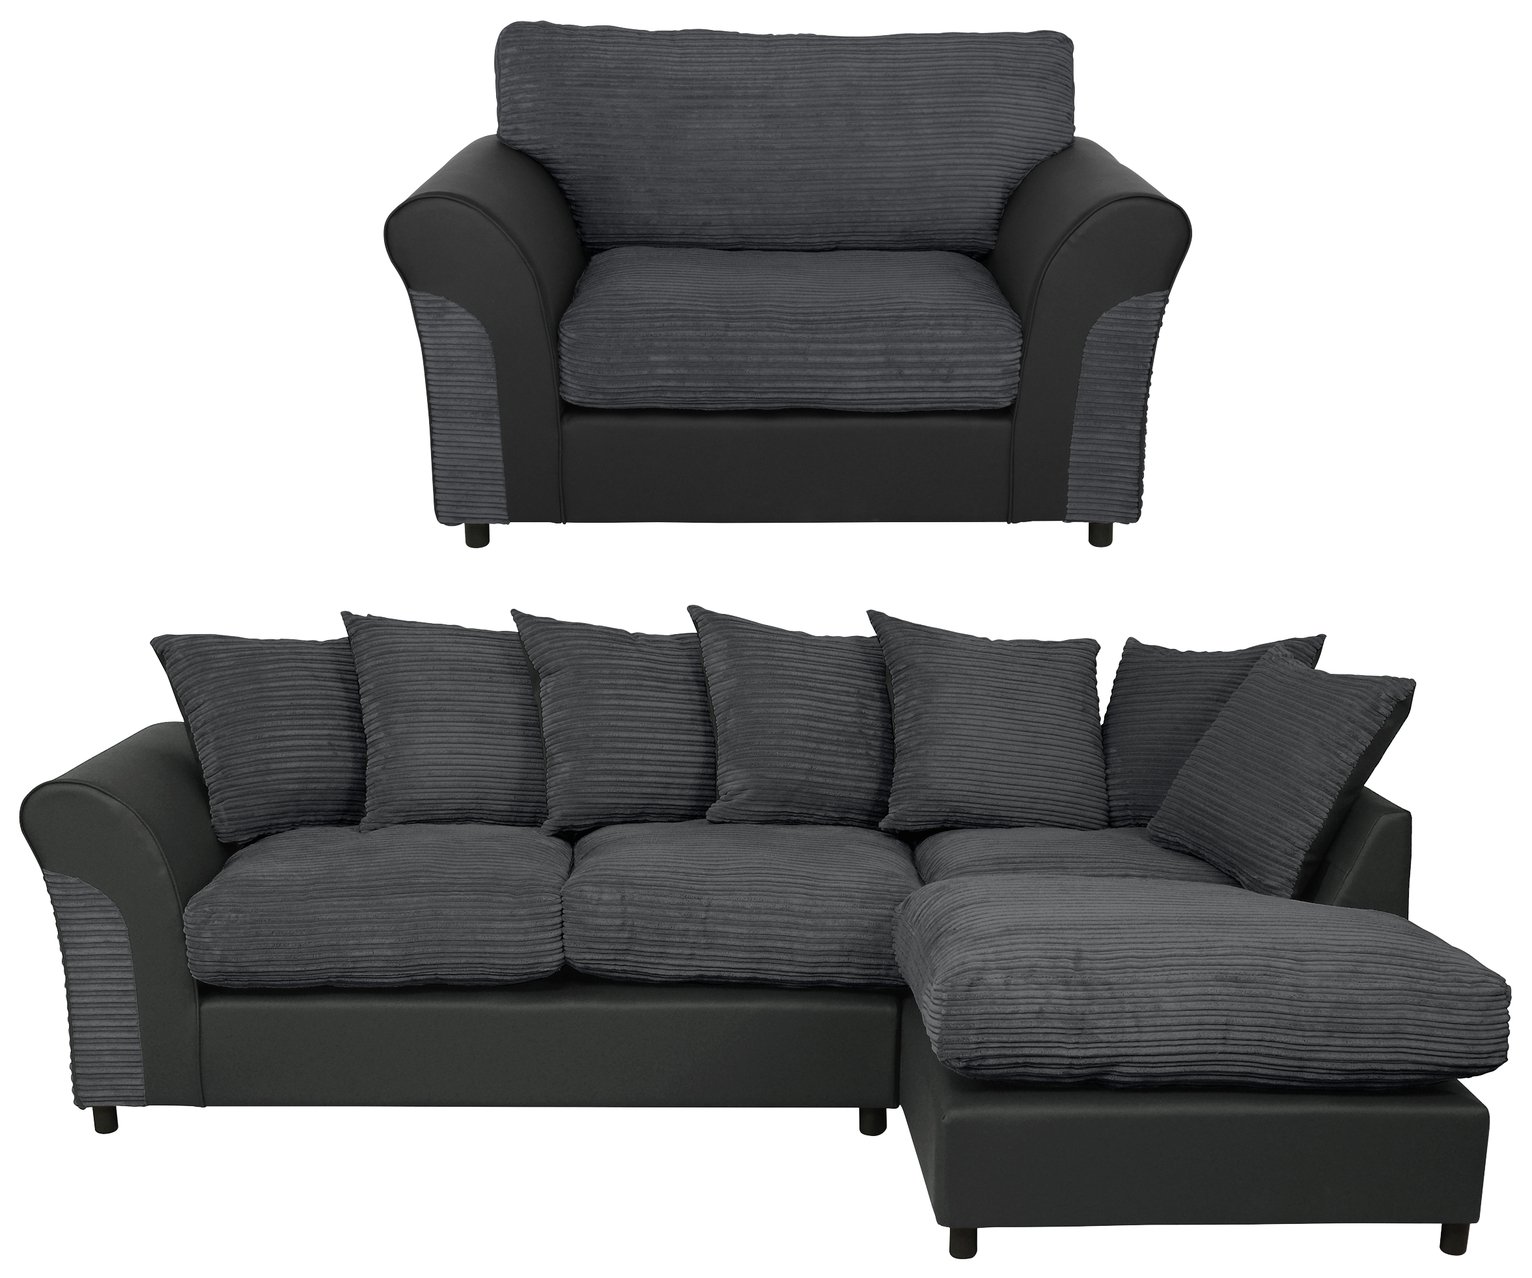 Argos Home Harry Chair and Right Corner Sofa - Charcoal